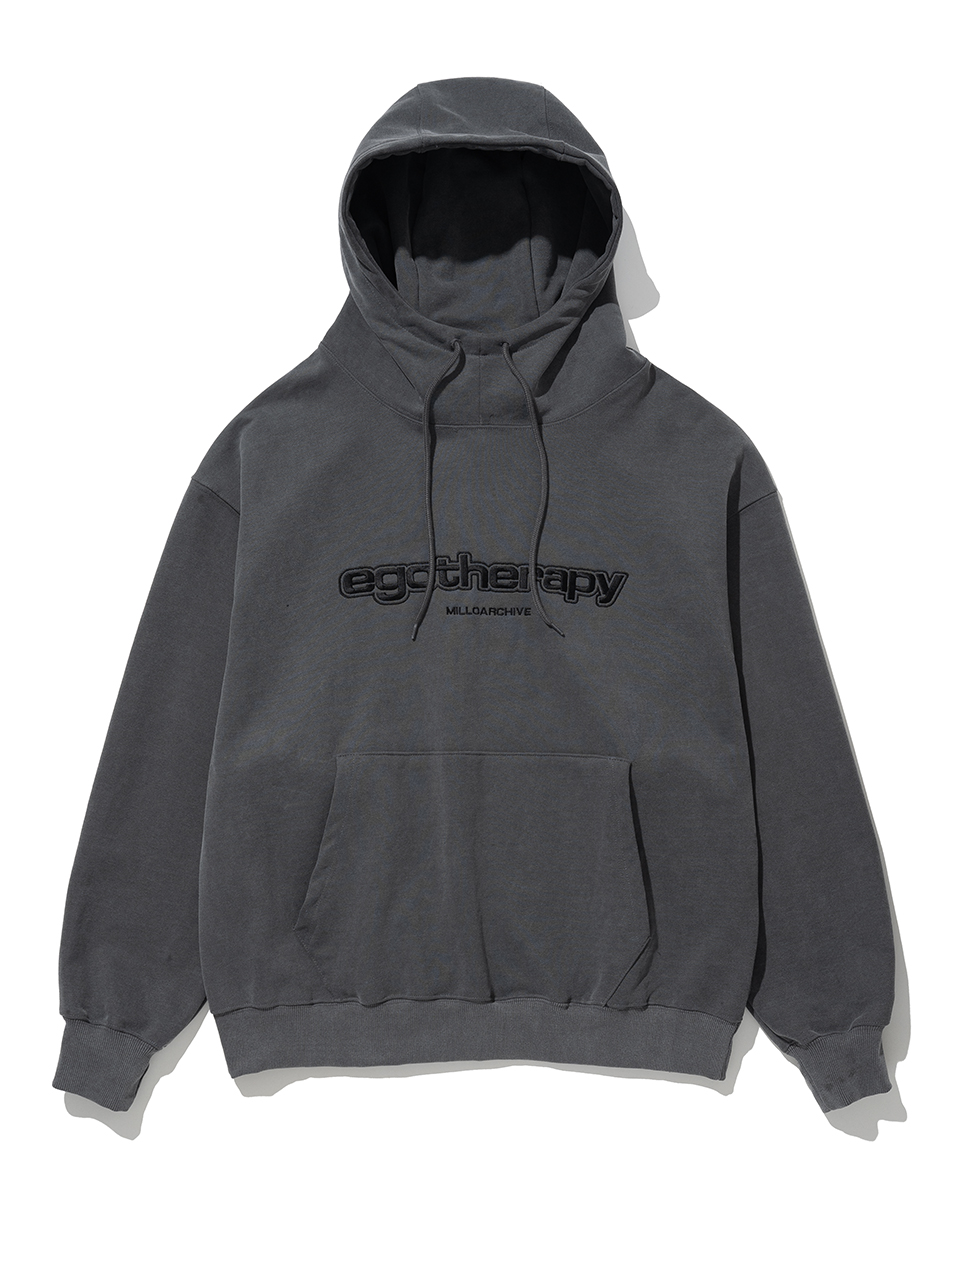 Ego Theraphy Hoodie - Cement Gray